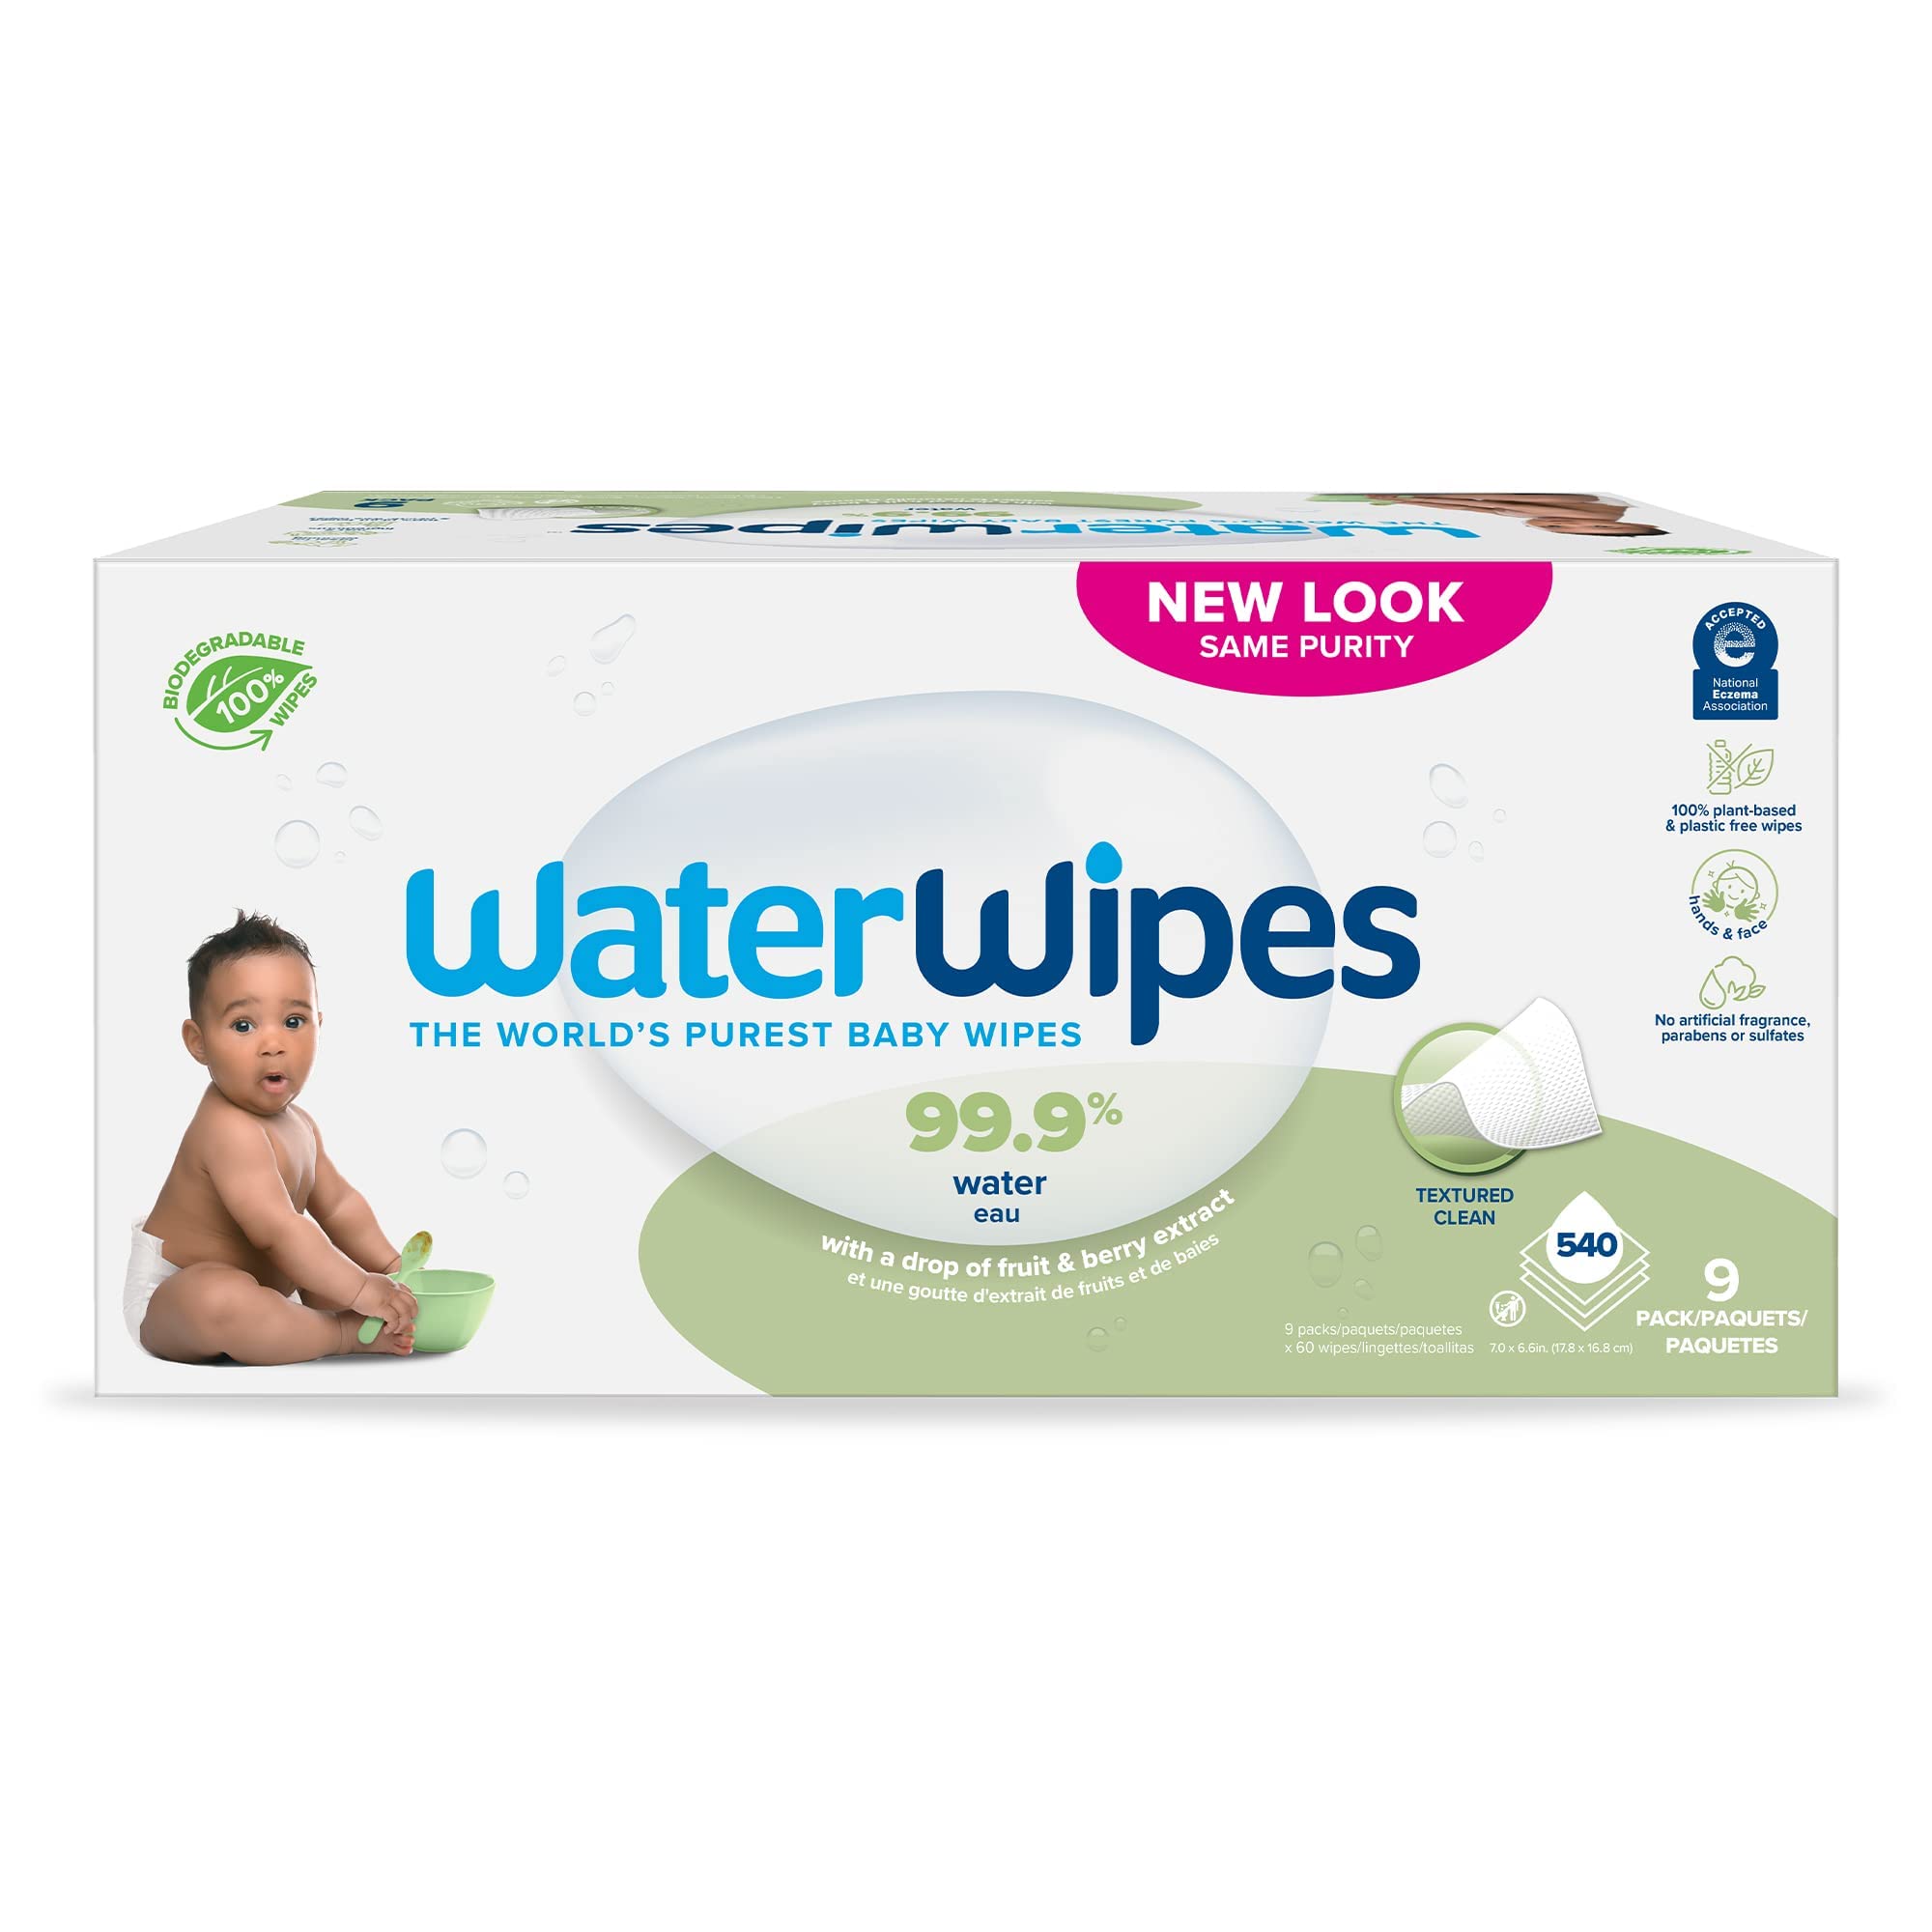 WaterWipes Plastic-Free Textured Clean, Toddler & Baby Wipes, 99.9% Water Based Wipes, Unscented & Hypoallergenic For Sensitive Skin, 540 Count (9 Packs), Packaging May Vary